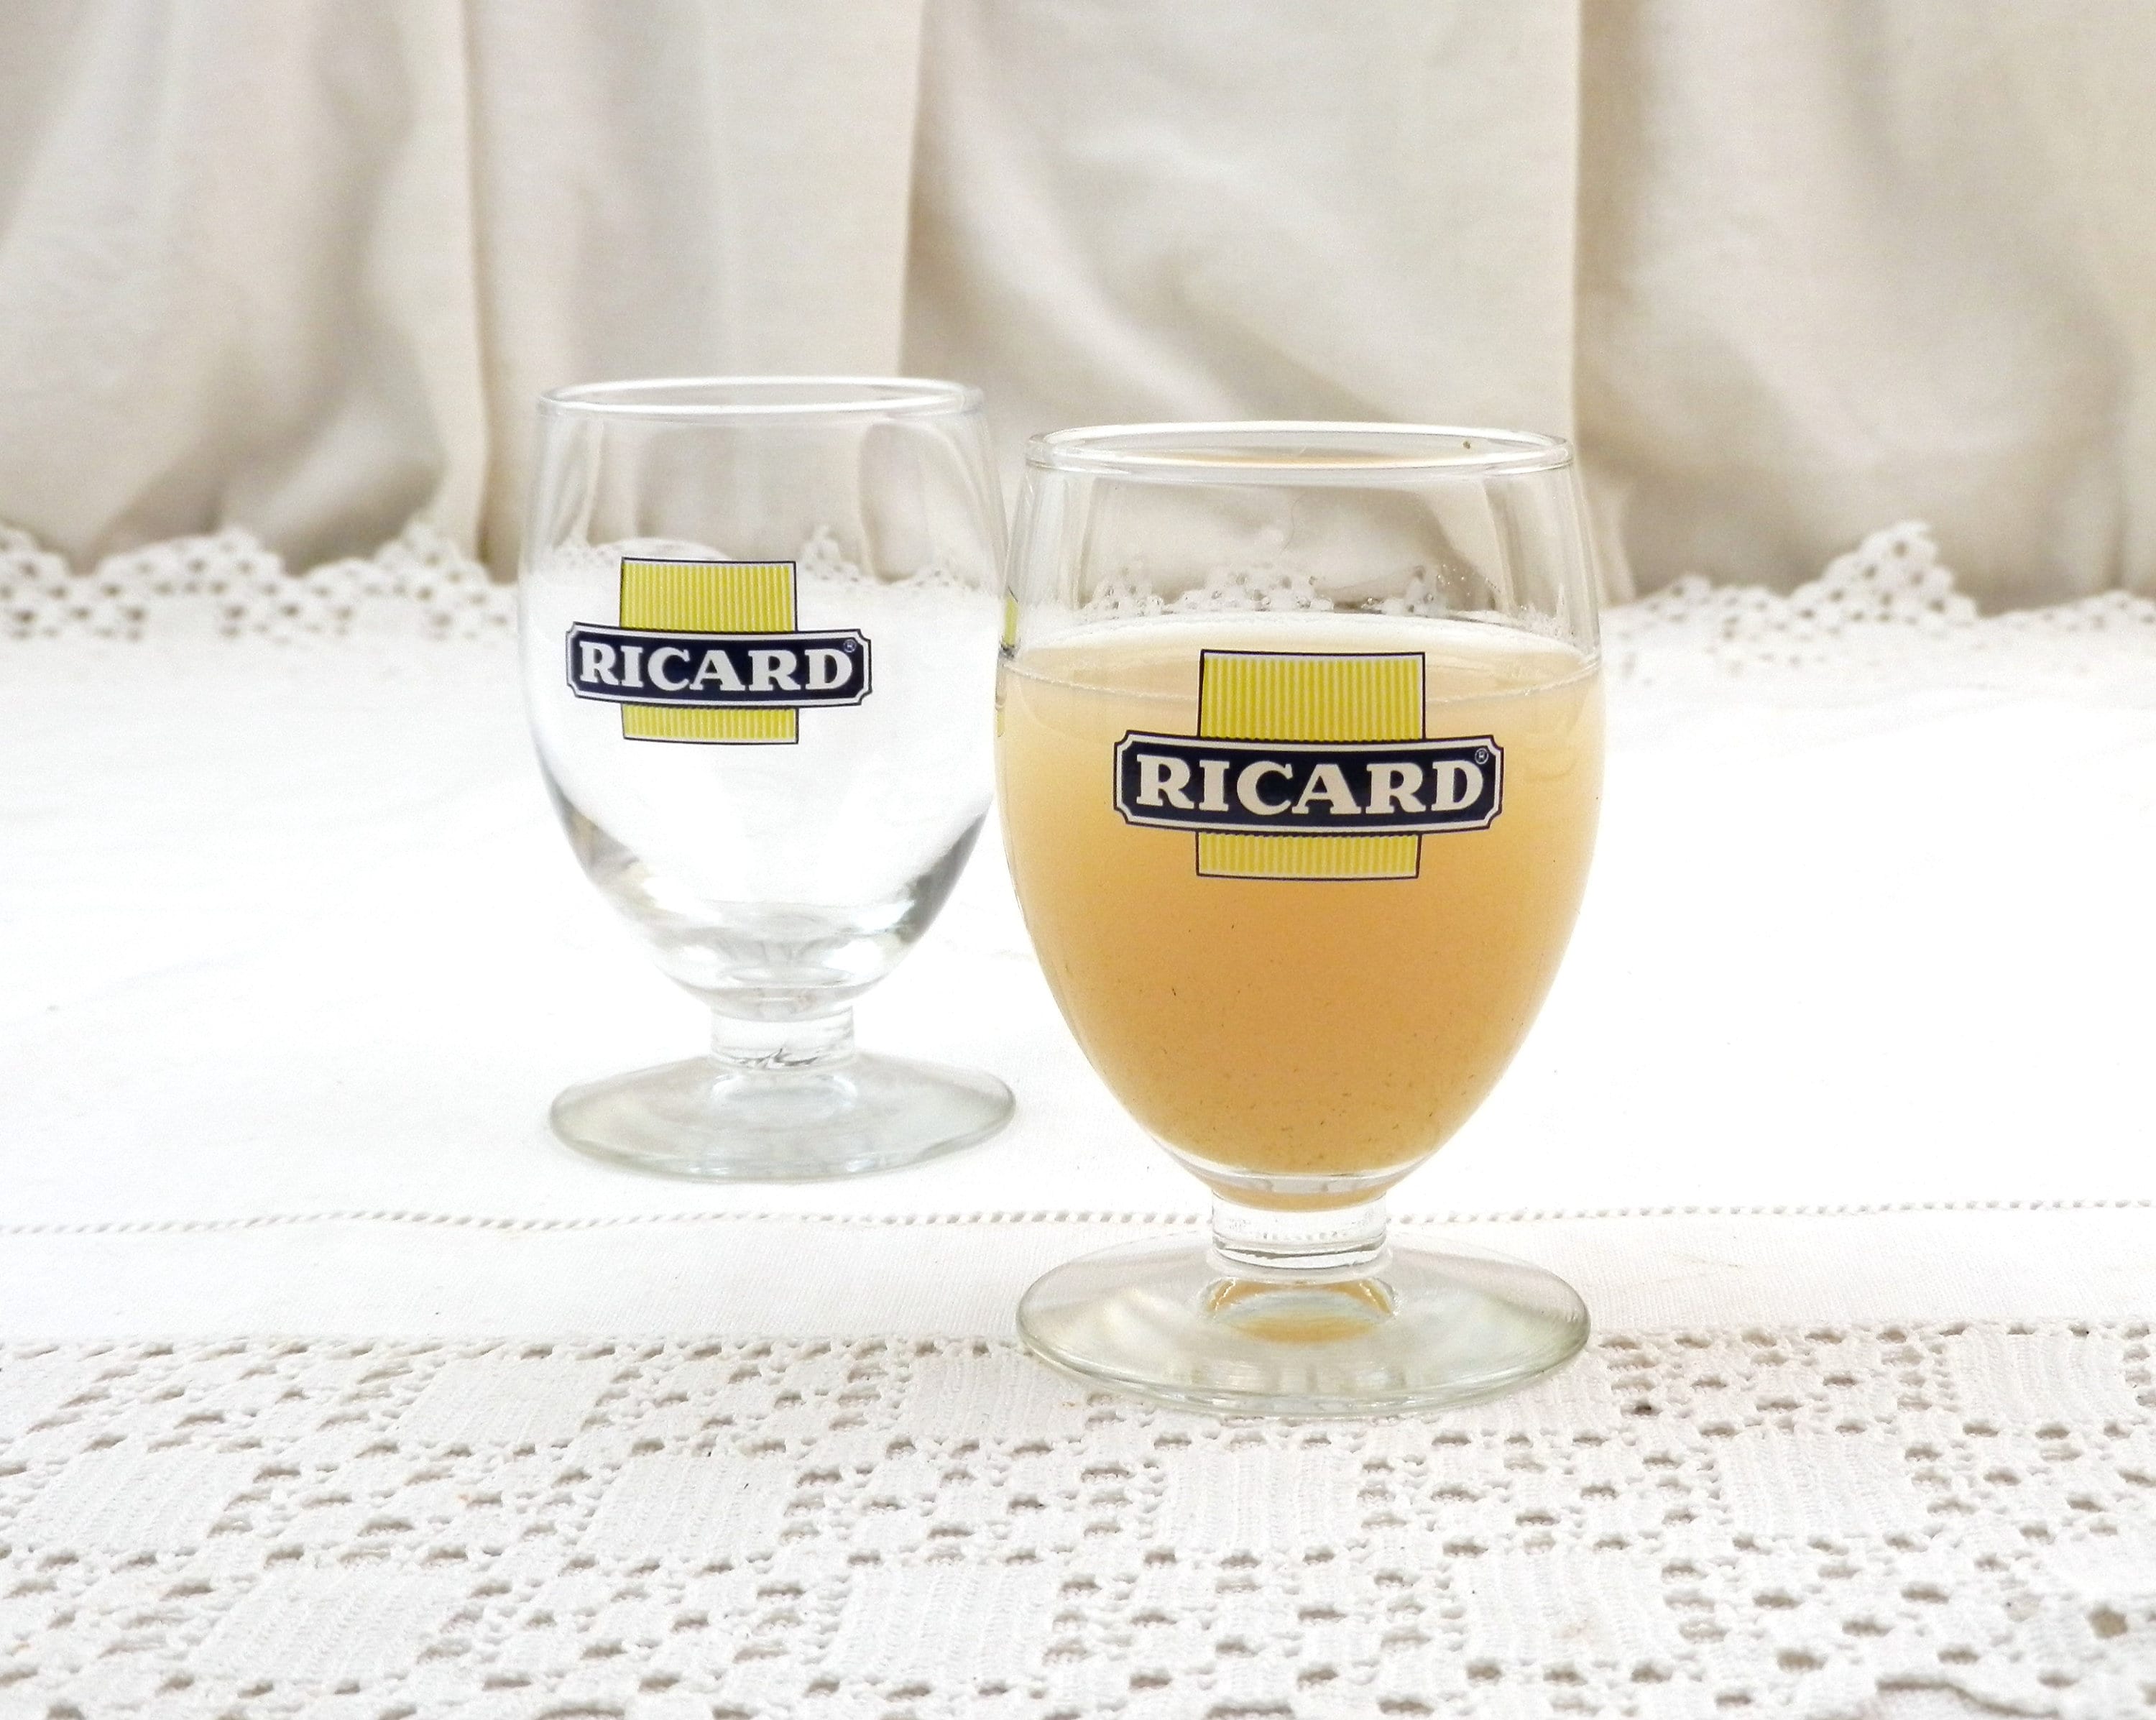 2 Small French Vintage Ricard Drinks Short Stemmed Glasses, Pair Retro  Pernod Aperitif Drinks Accessory from France, Parisian Flea Market